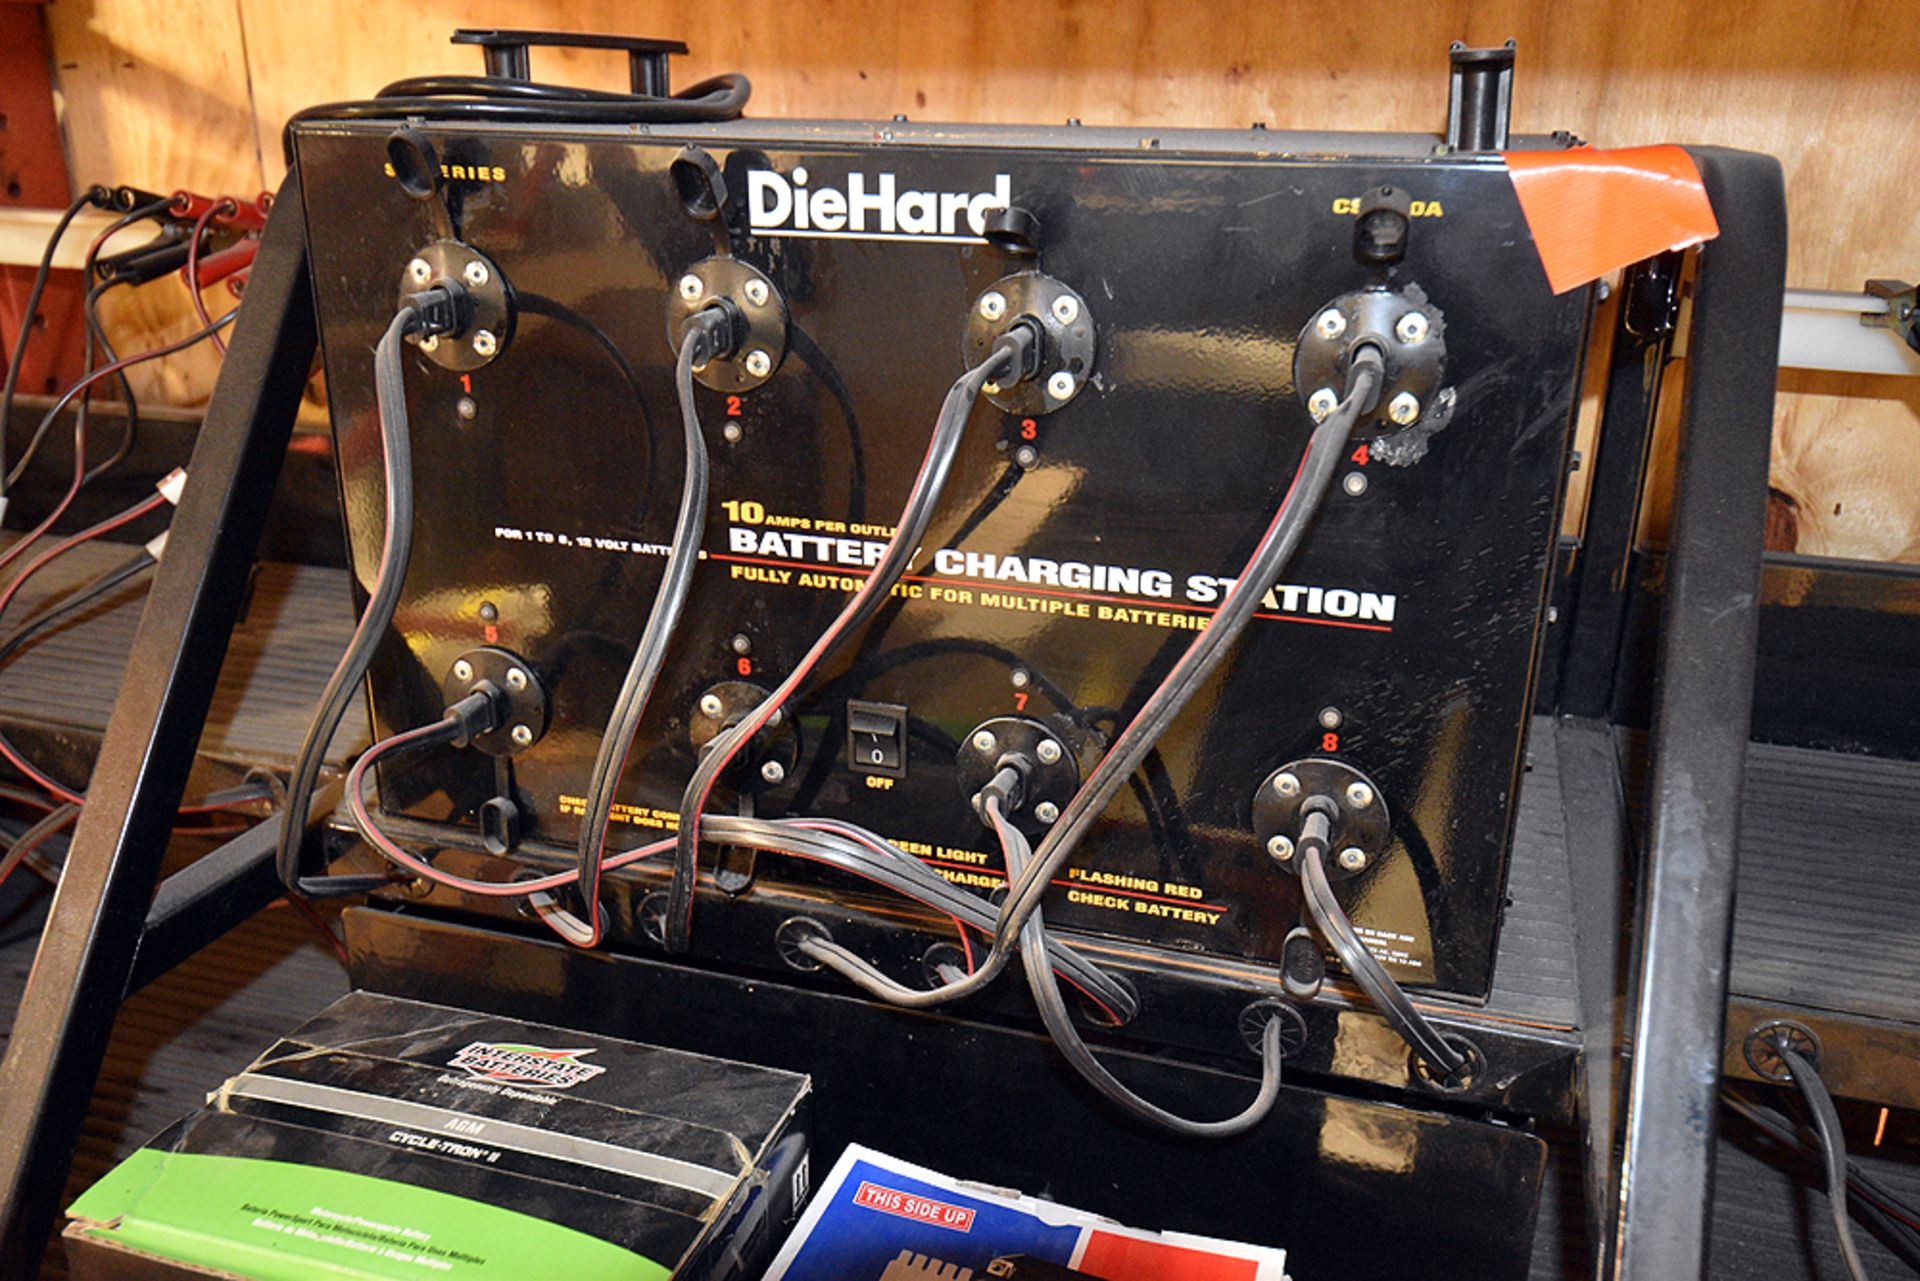 DieHard Fully Automatic Battery Charging Station - Image 3 of 3